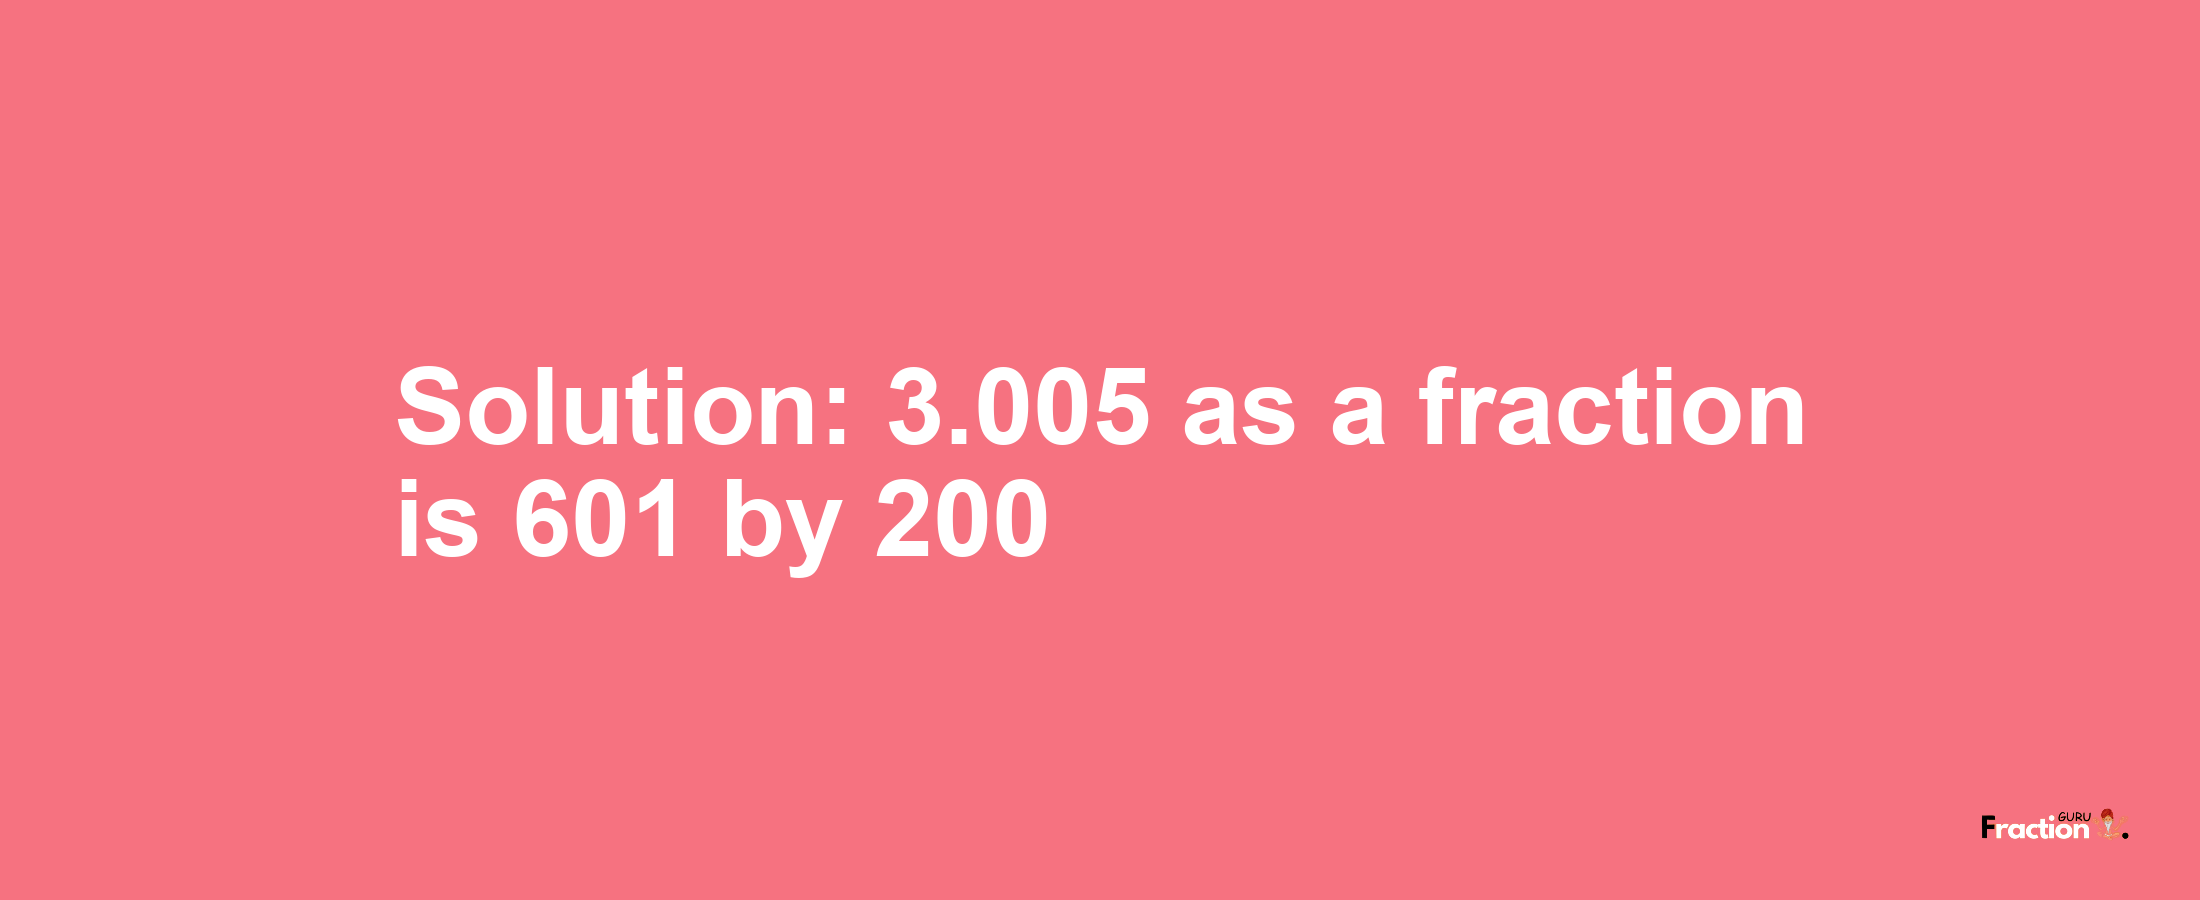 Solution:3.005 as a fraction is 601/200